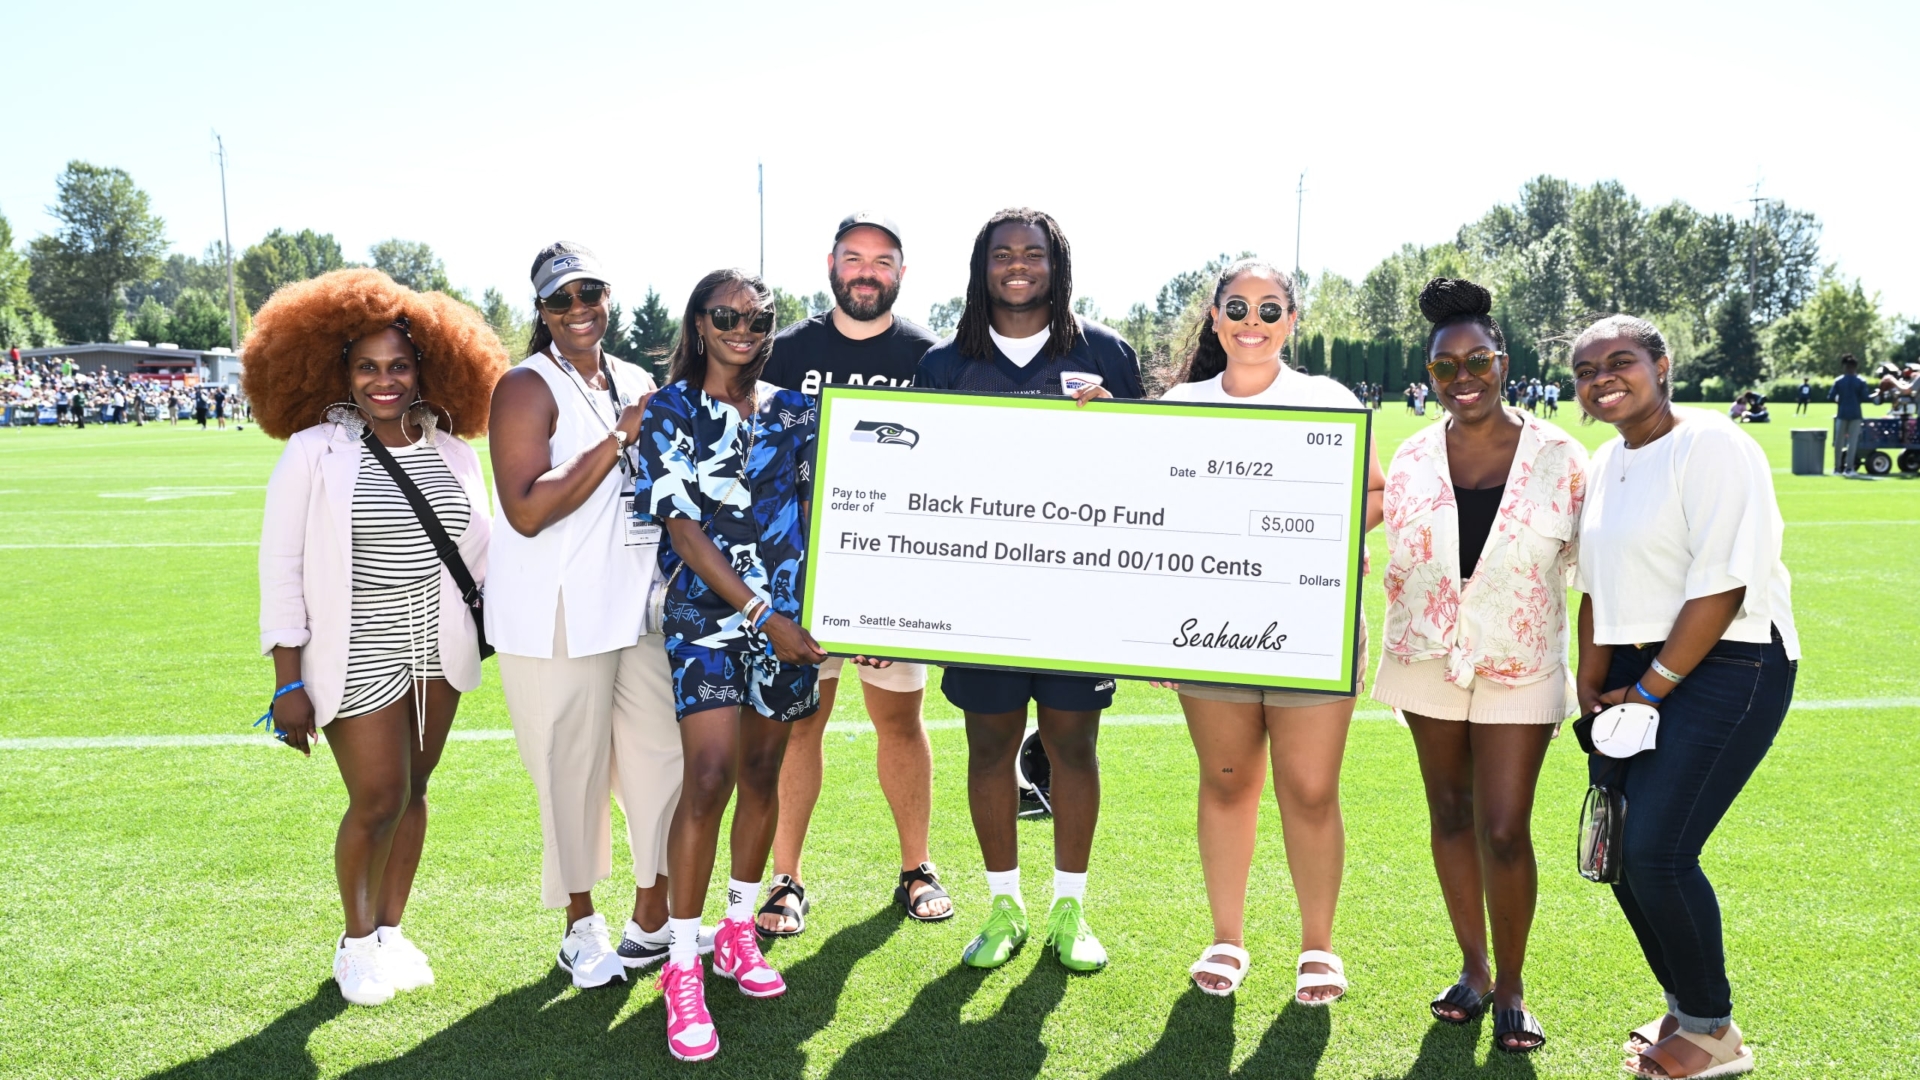 Eight people smile as they hold a giant check for the Black Future Co-Op Fund.